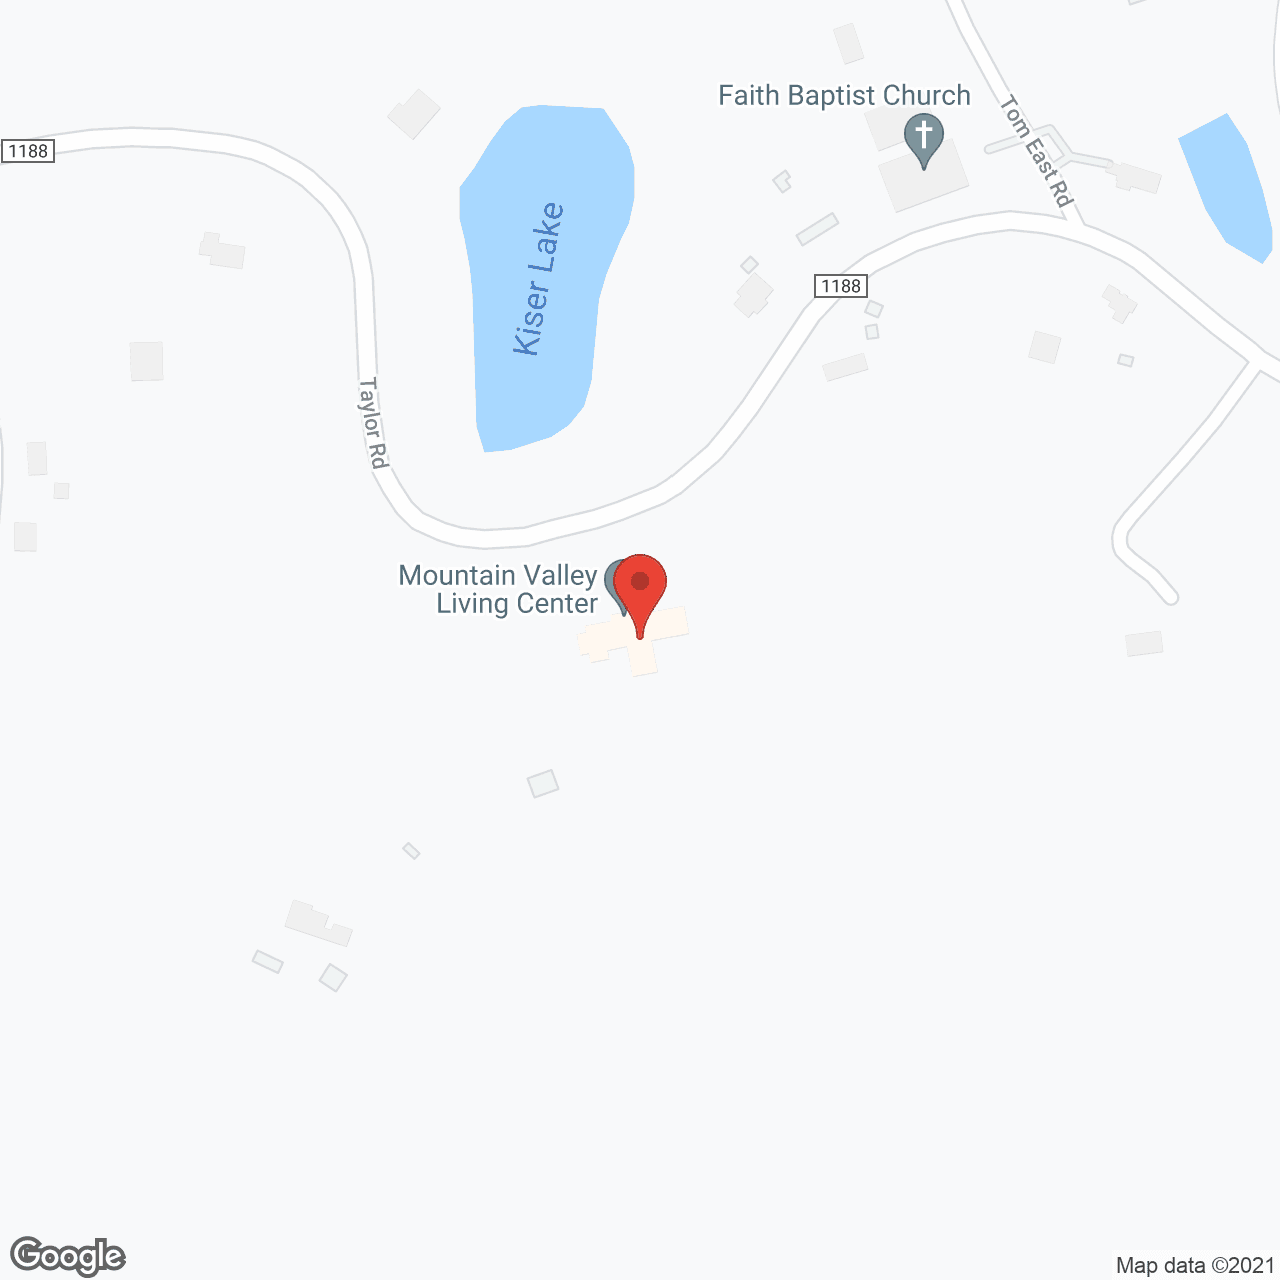 Mountain Valley Living Center in google map